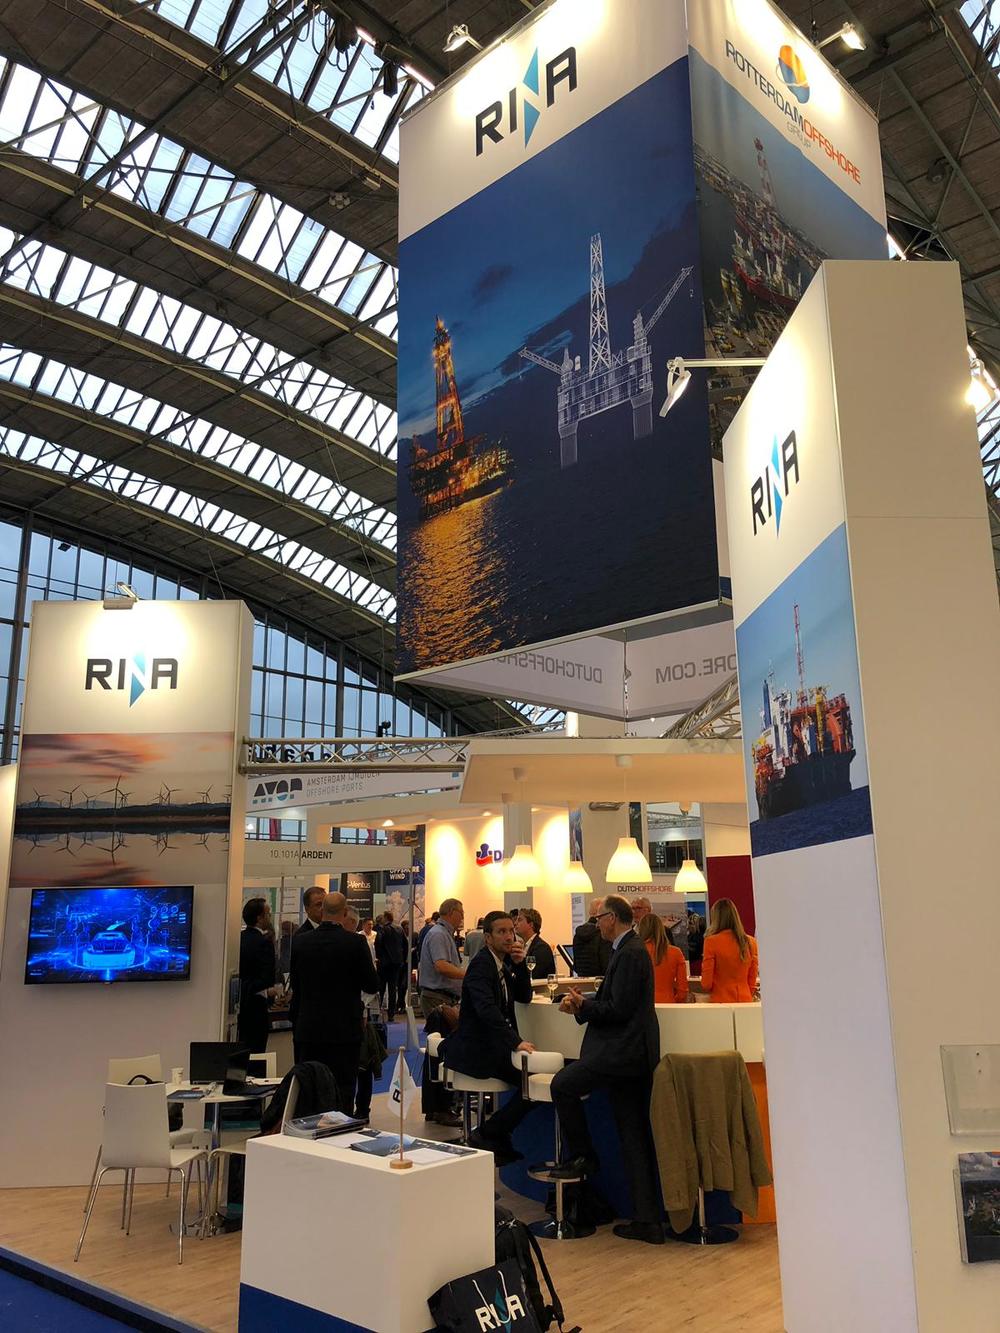 Offshore Energy Exhibition & Conference